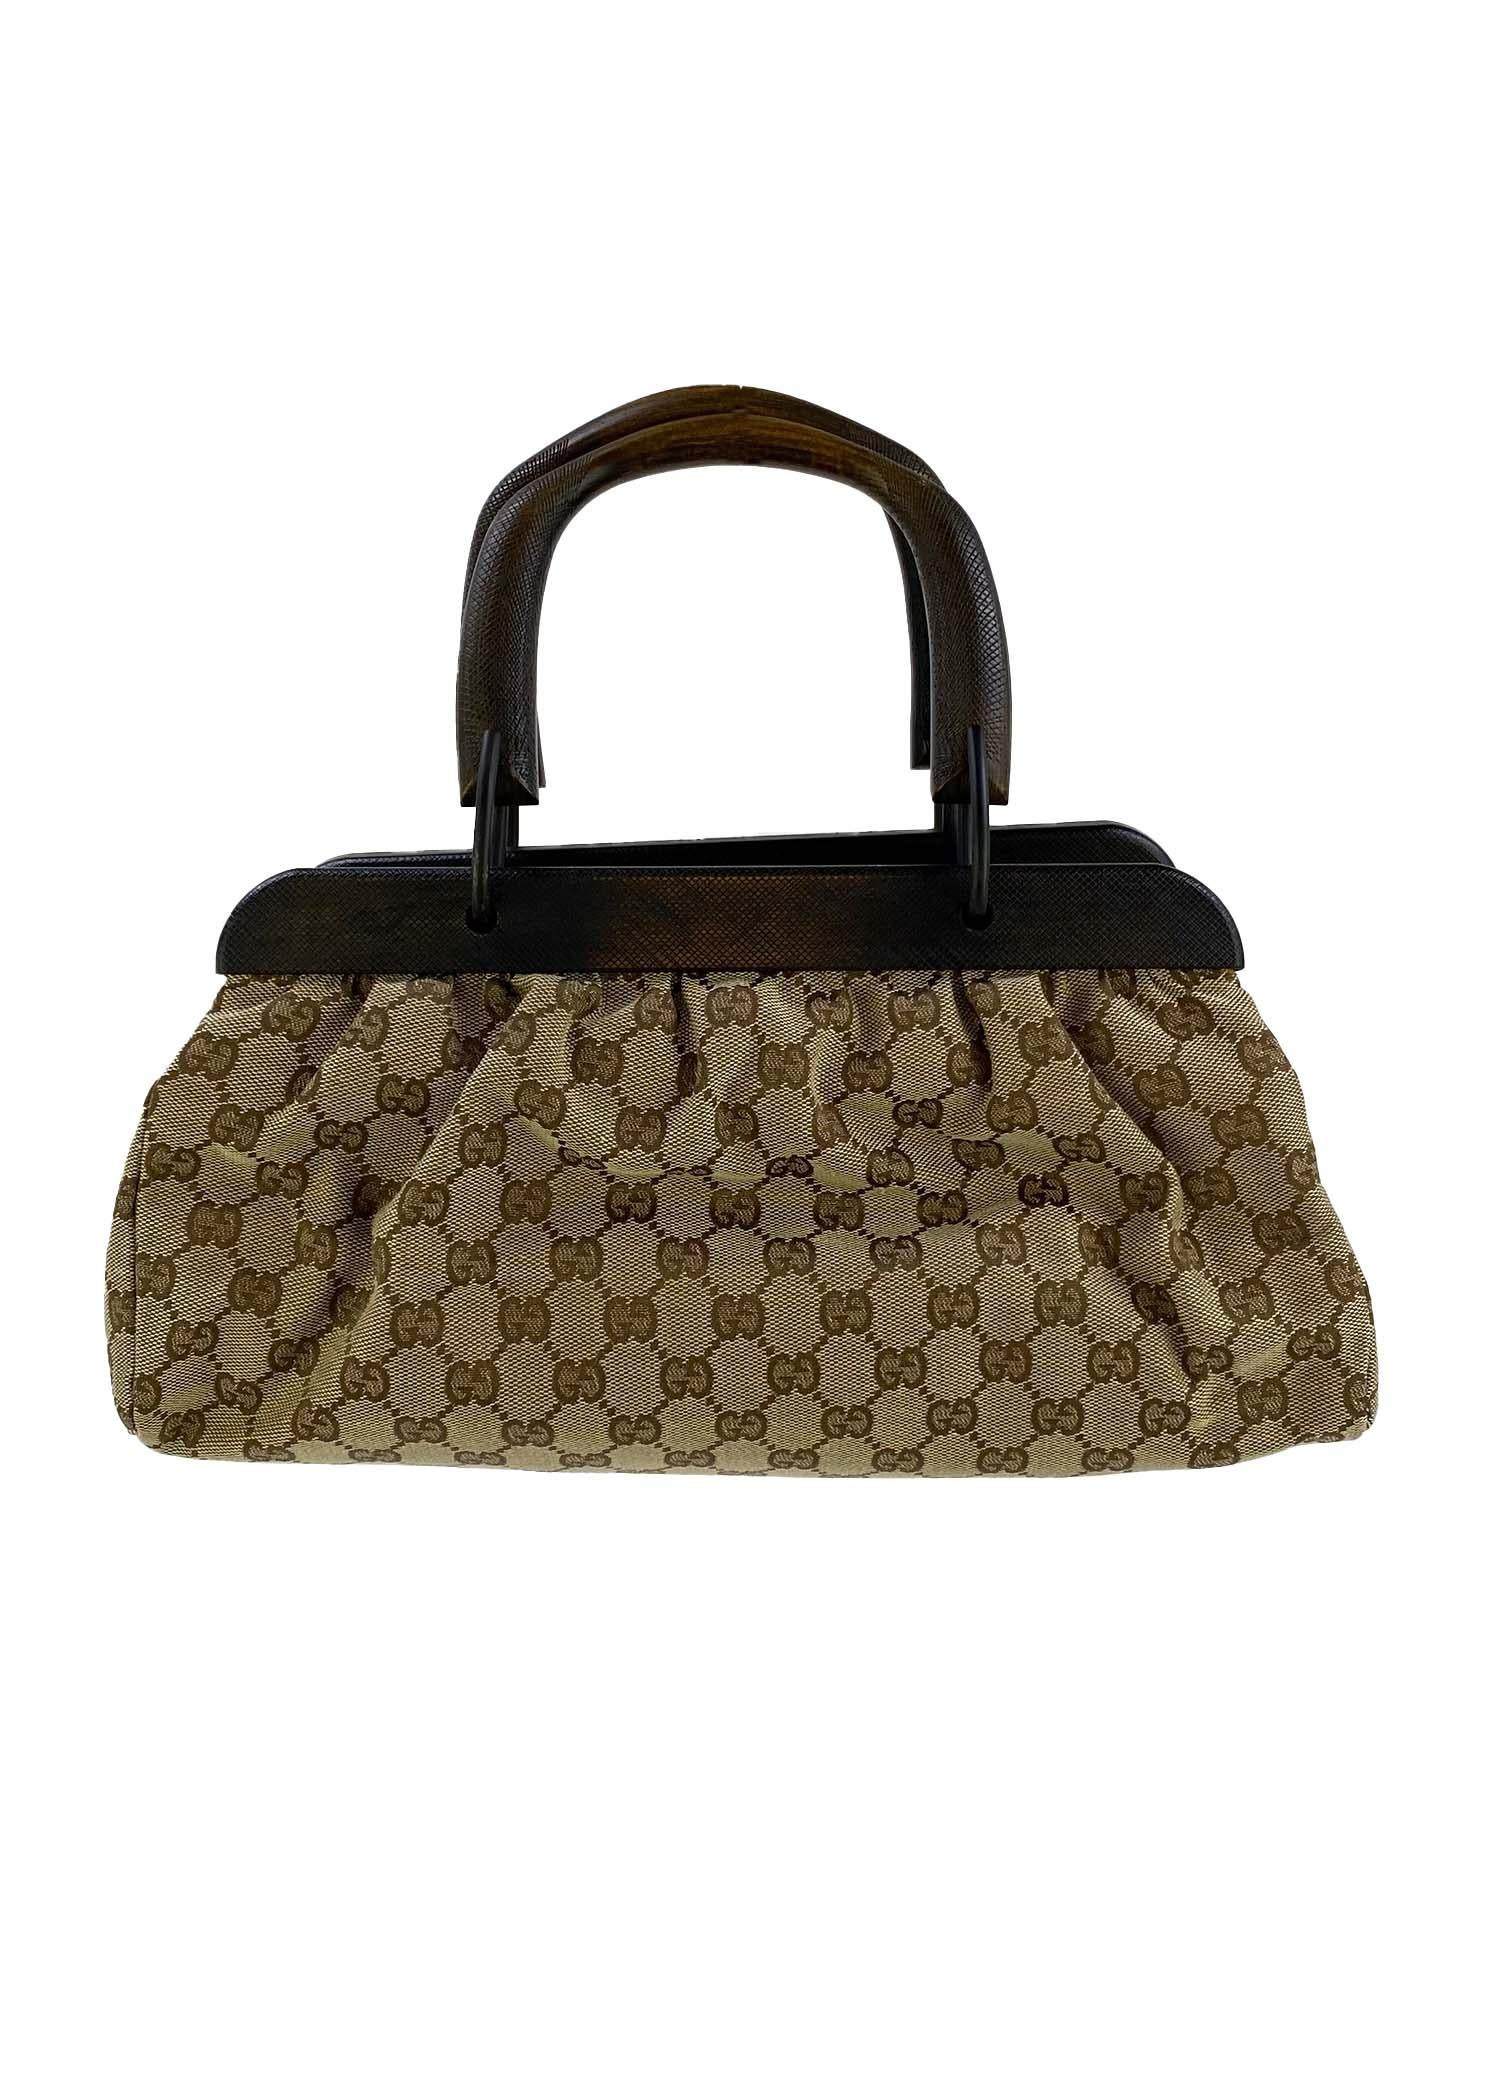 gucci bag with wood handle